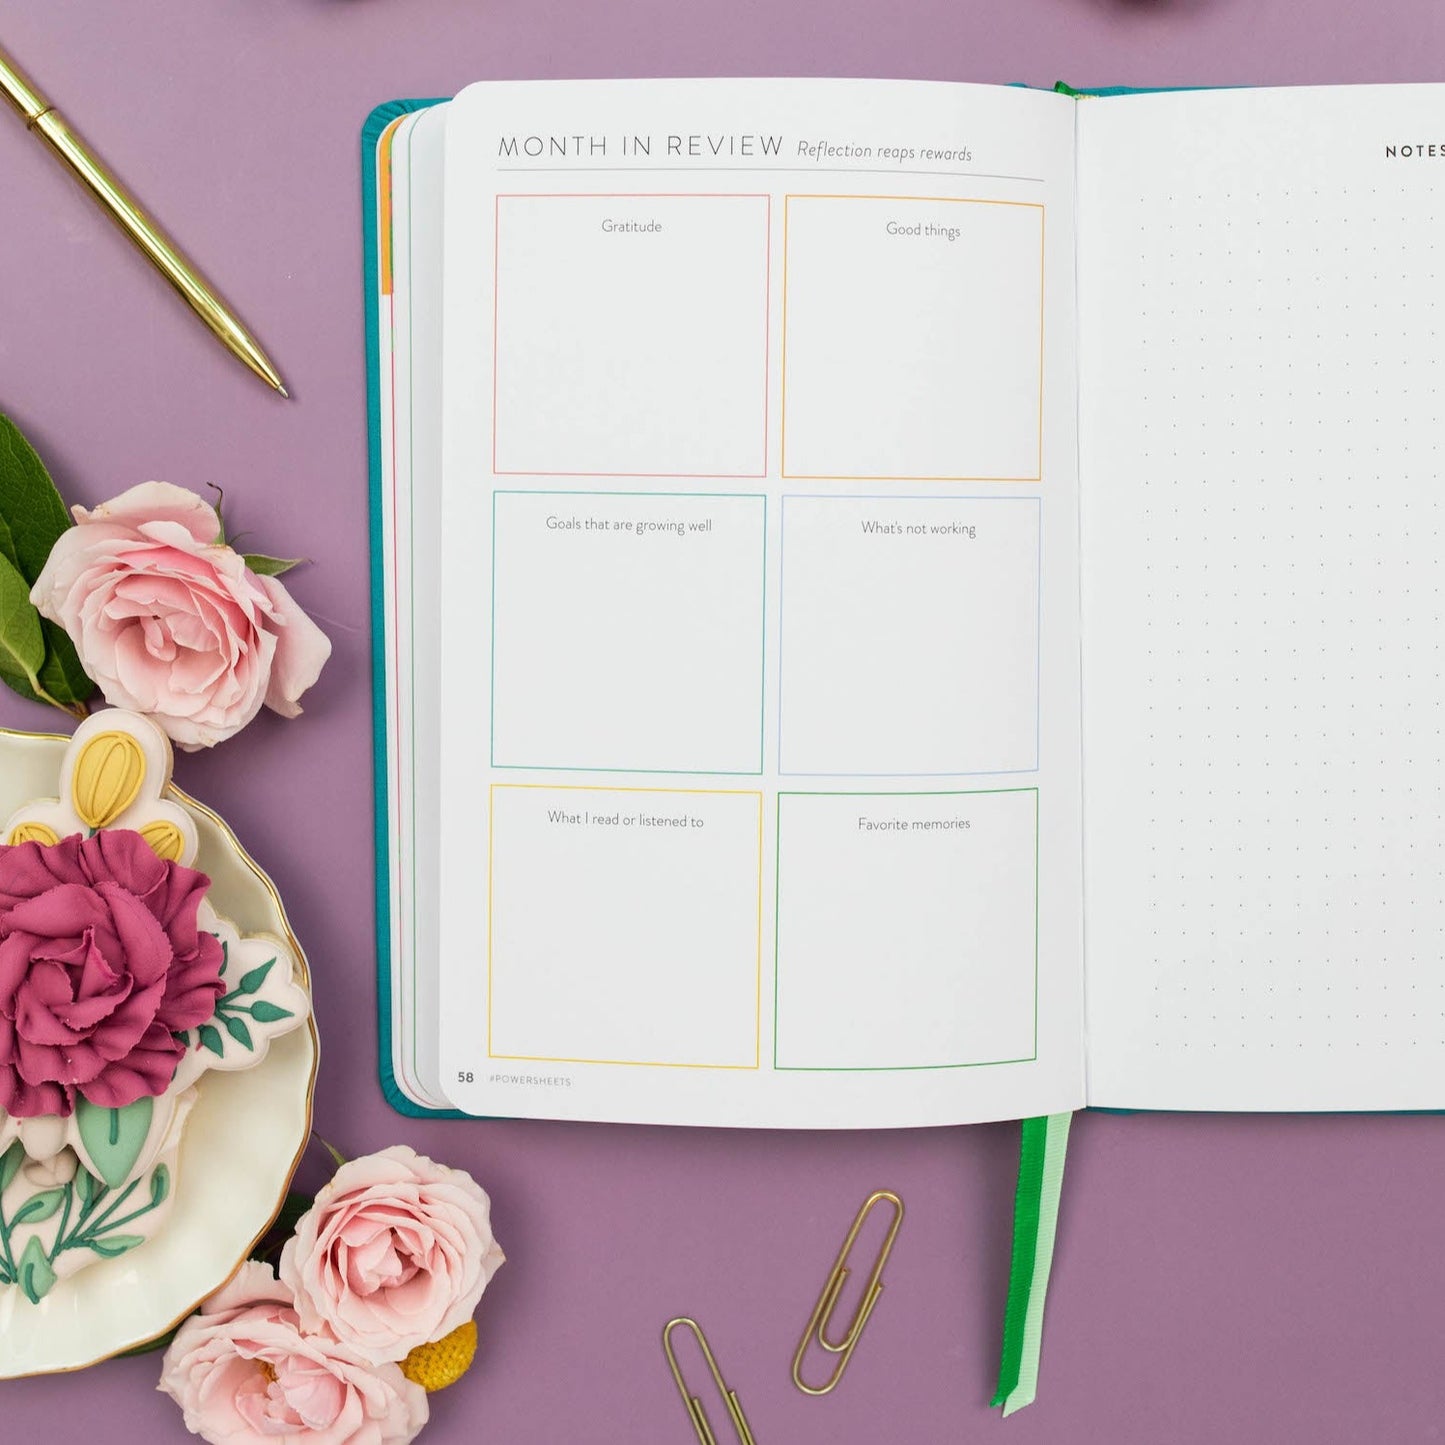 90-Day PowerSheets® Goal Planner  | Weekly Undated (Ivy)